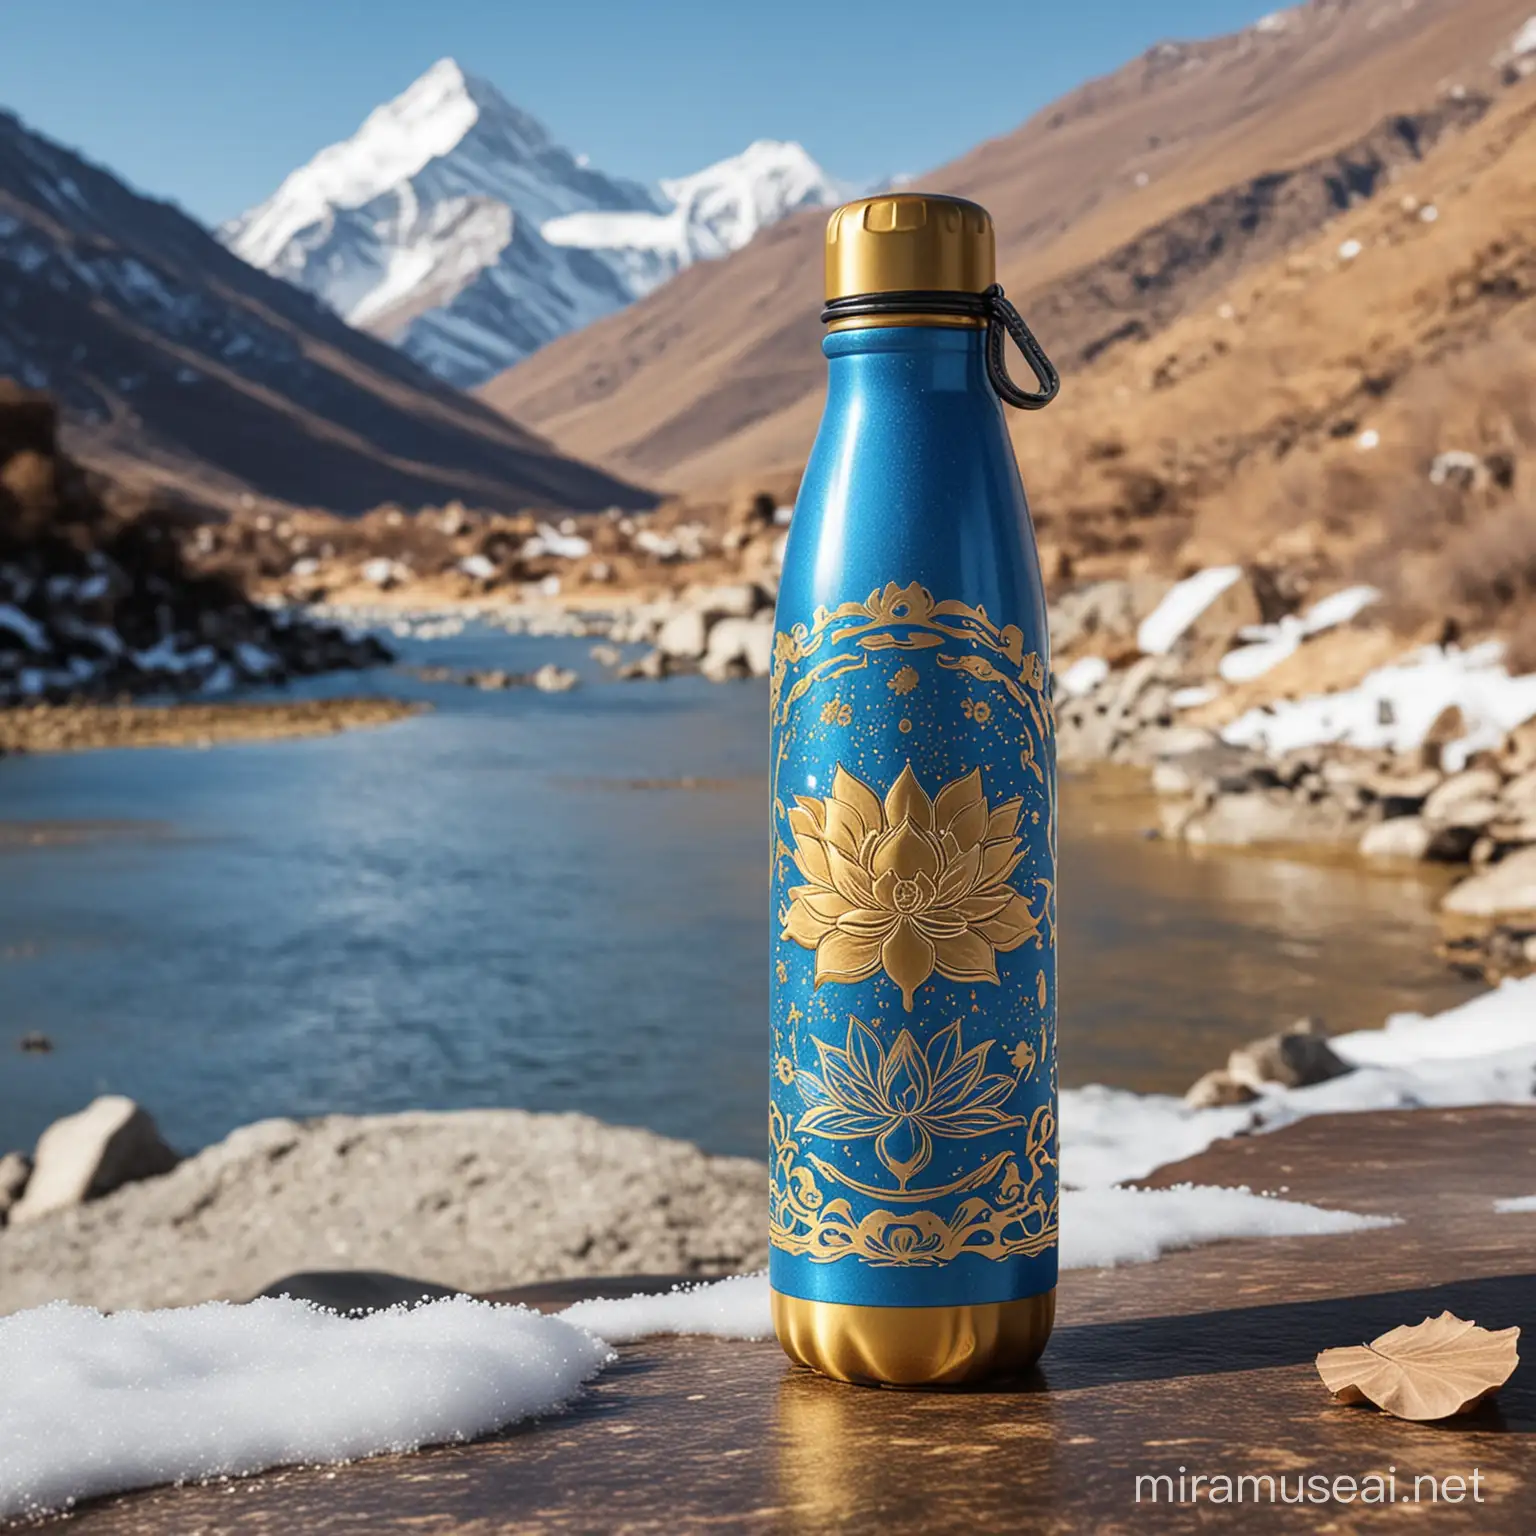 Tibet Buddhism Inspired Pure Water Bottle Design with Sun Lotus Blue Gold and SnowCapped Mountain Elements